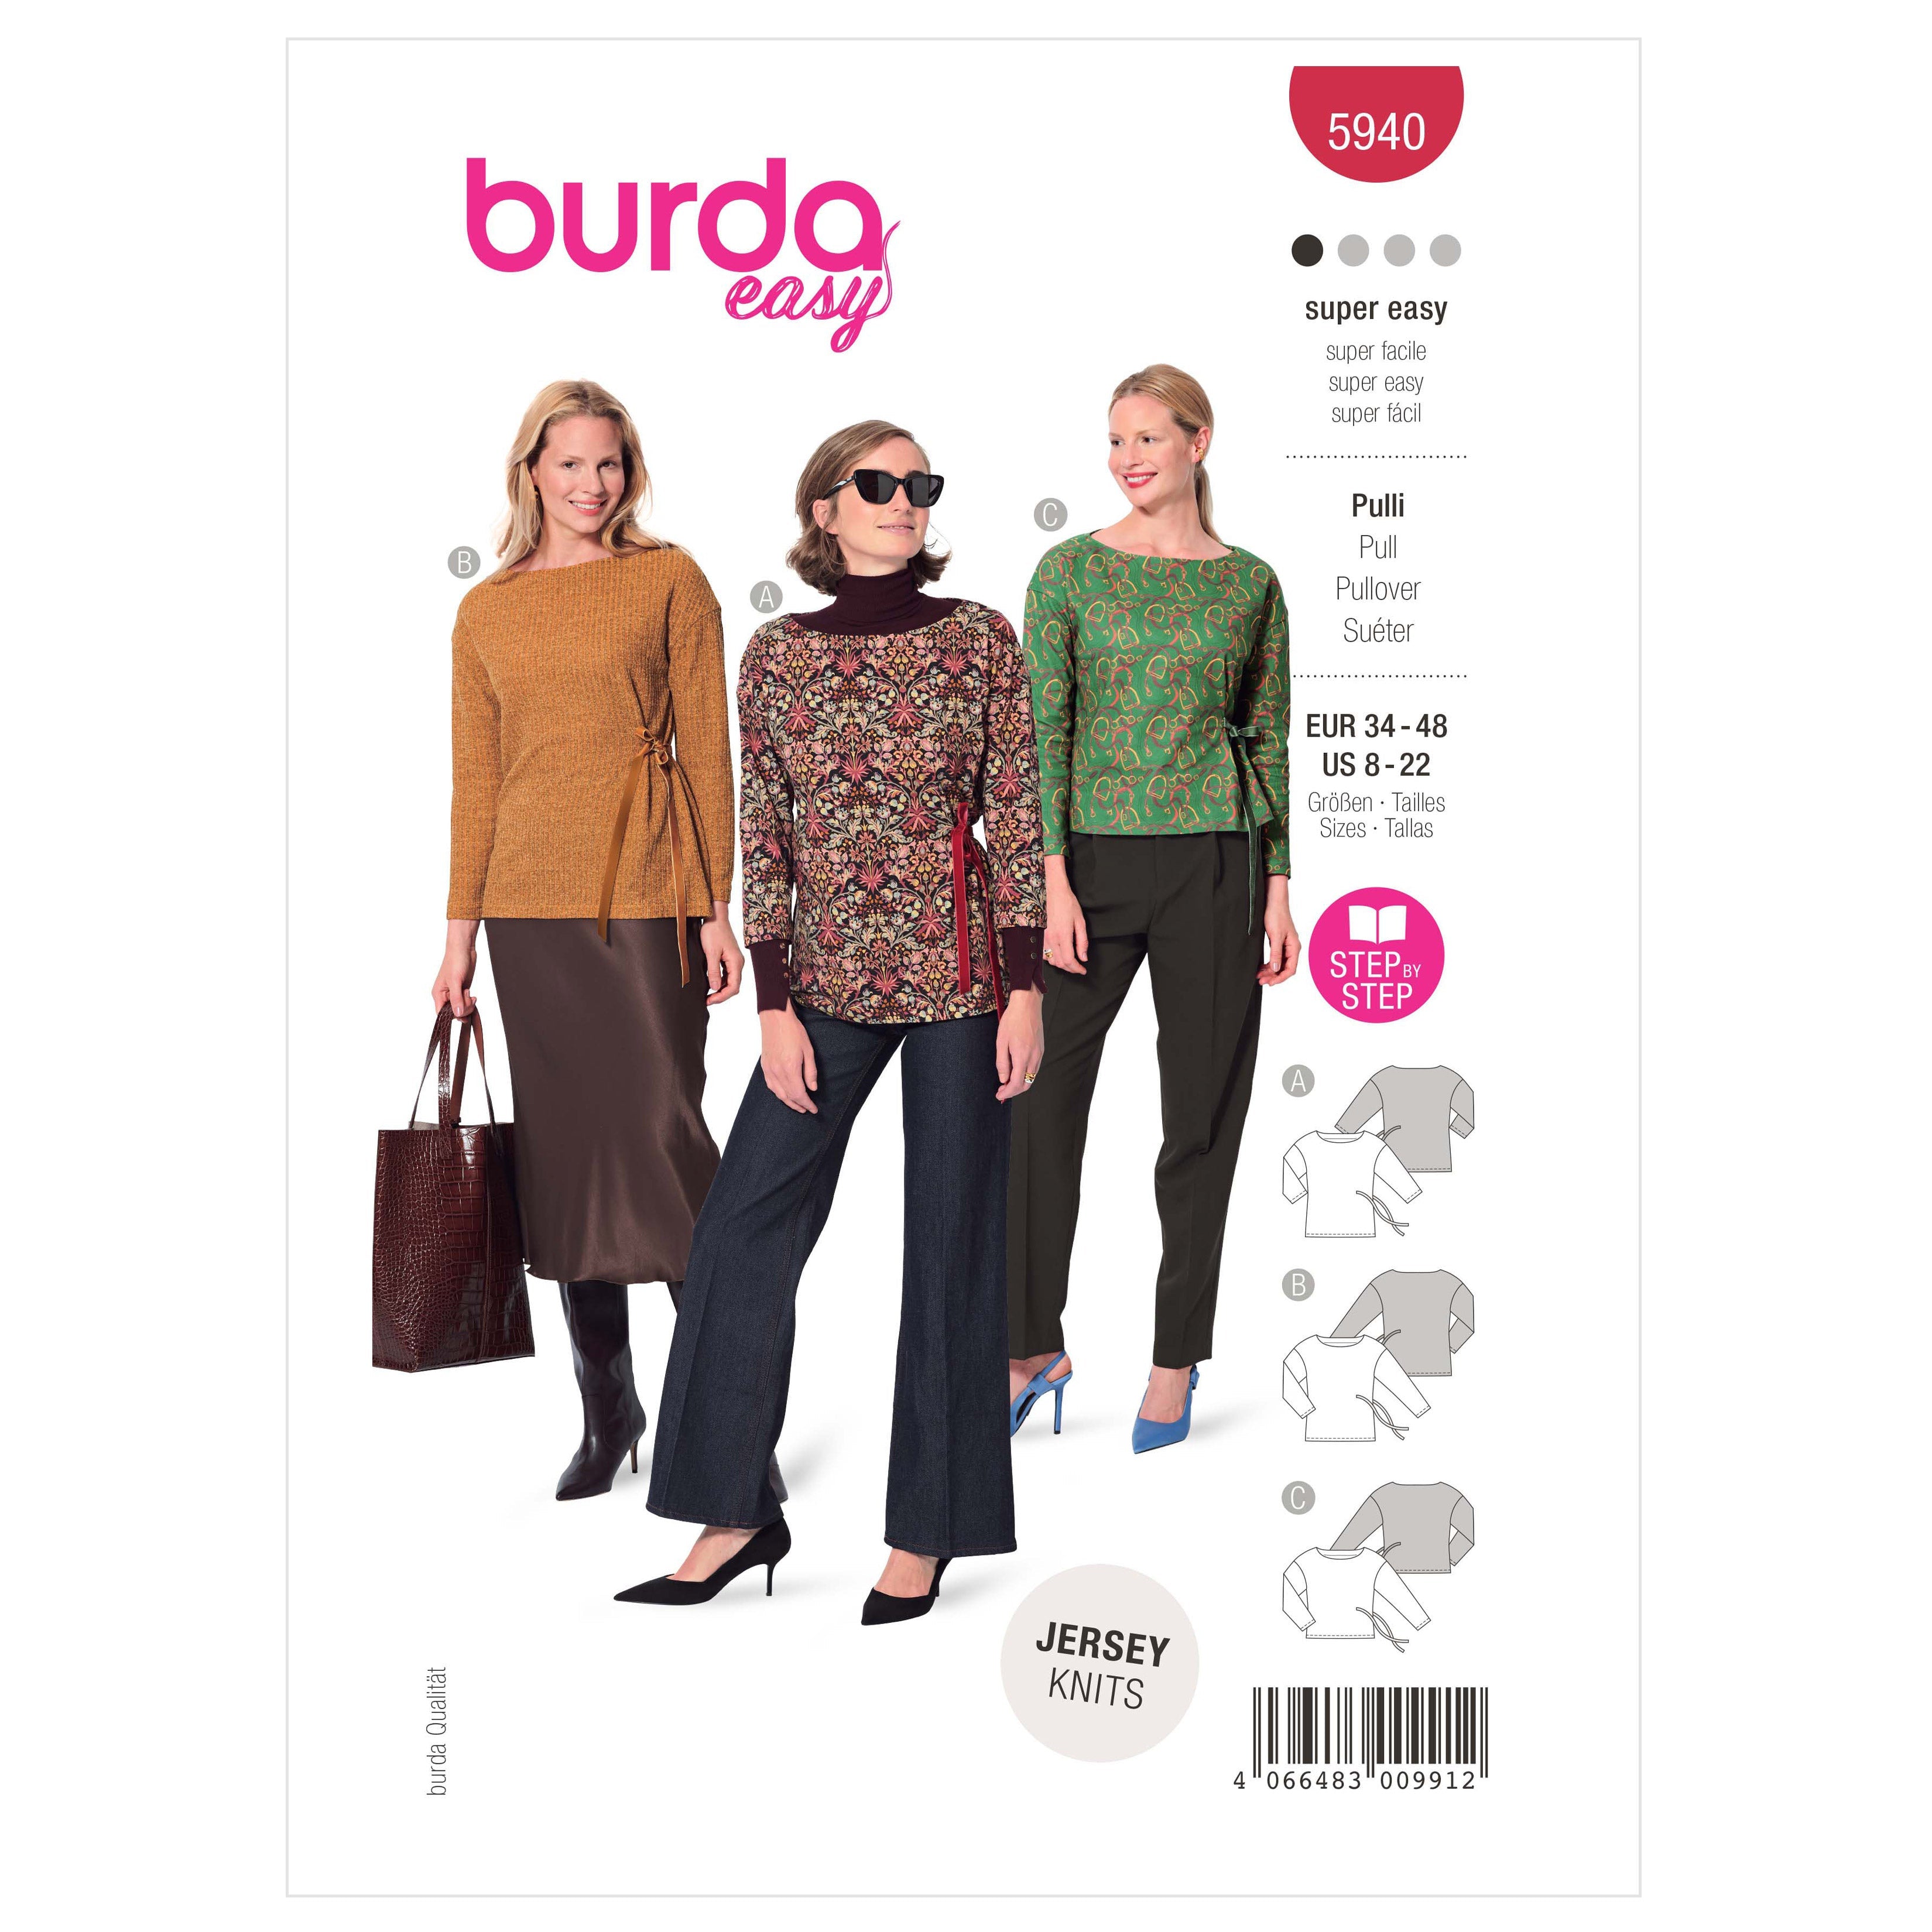 Burda Sewing Pattern 5940 Misses' Top from Jaycotts Sewing Supplies